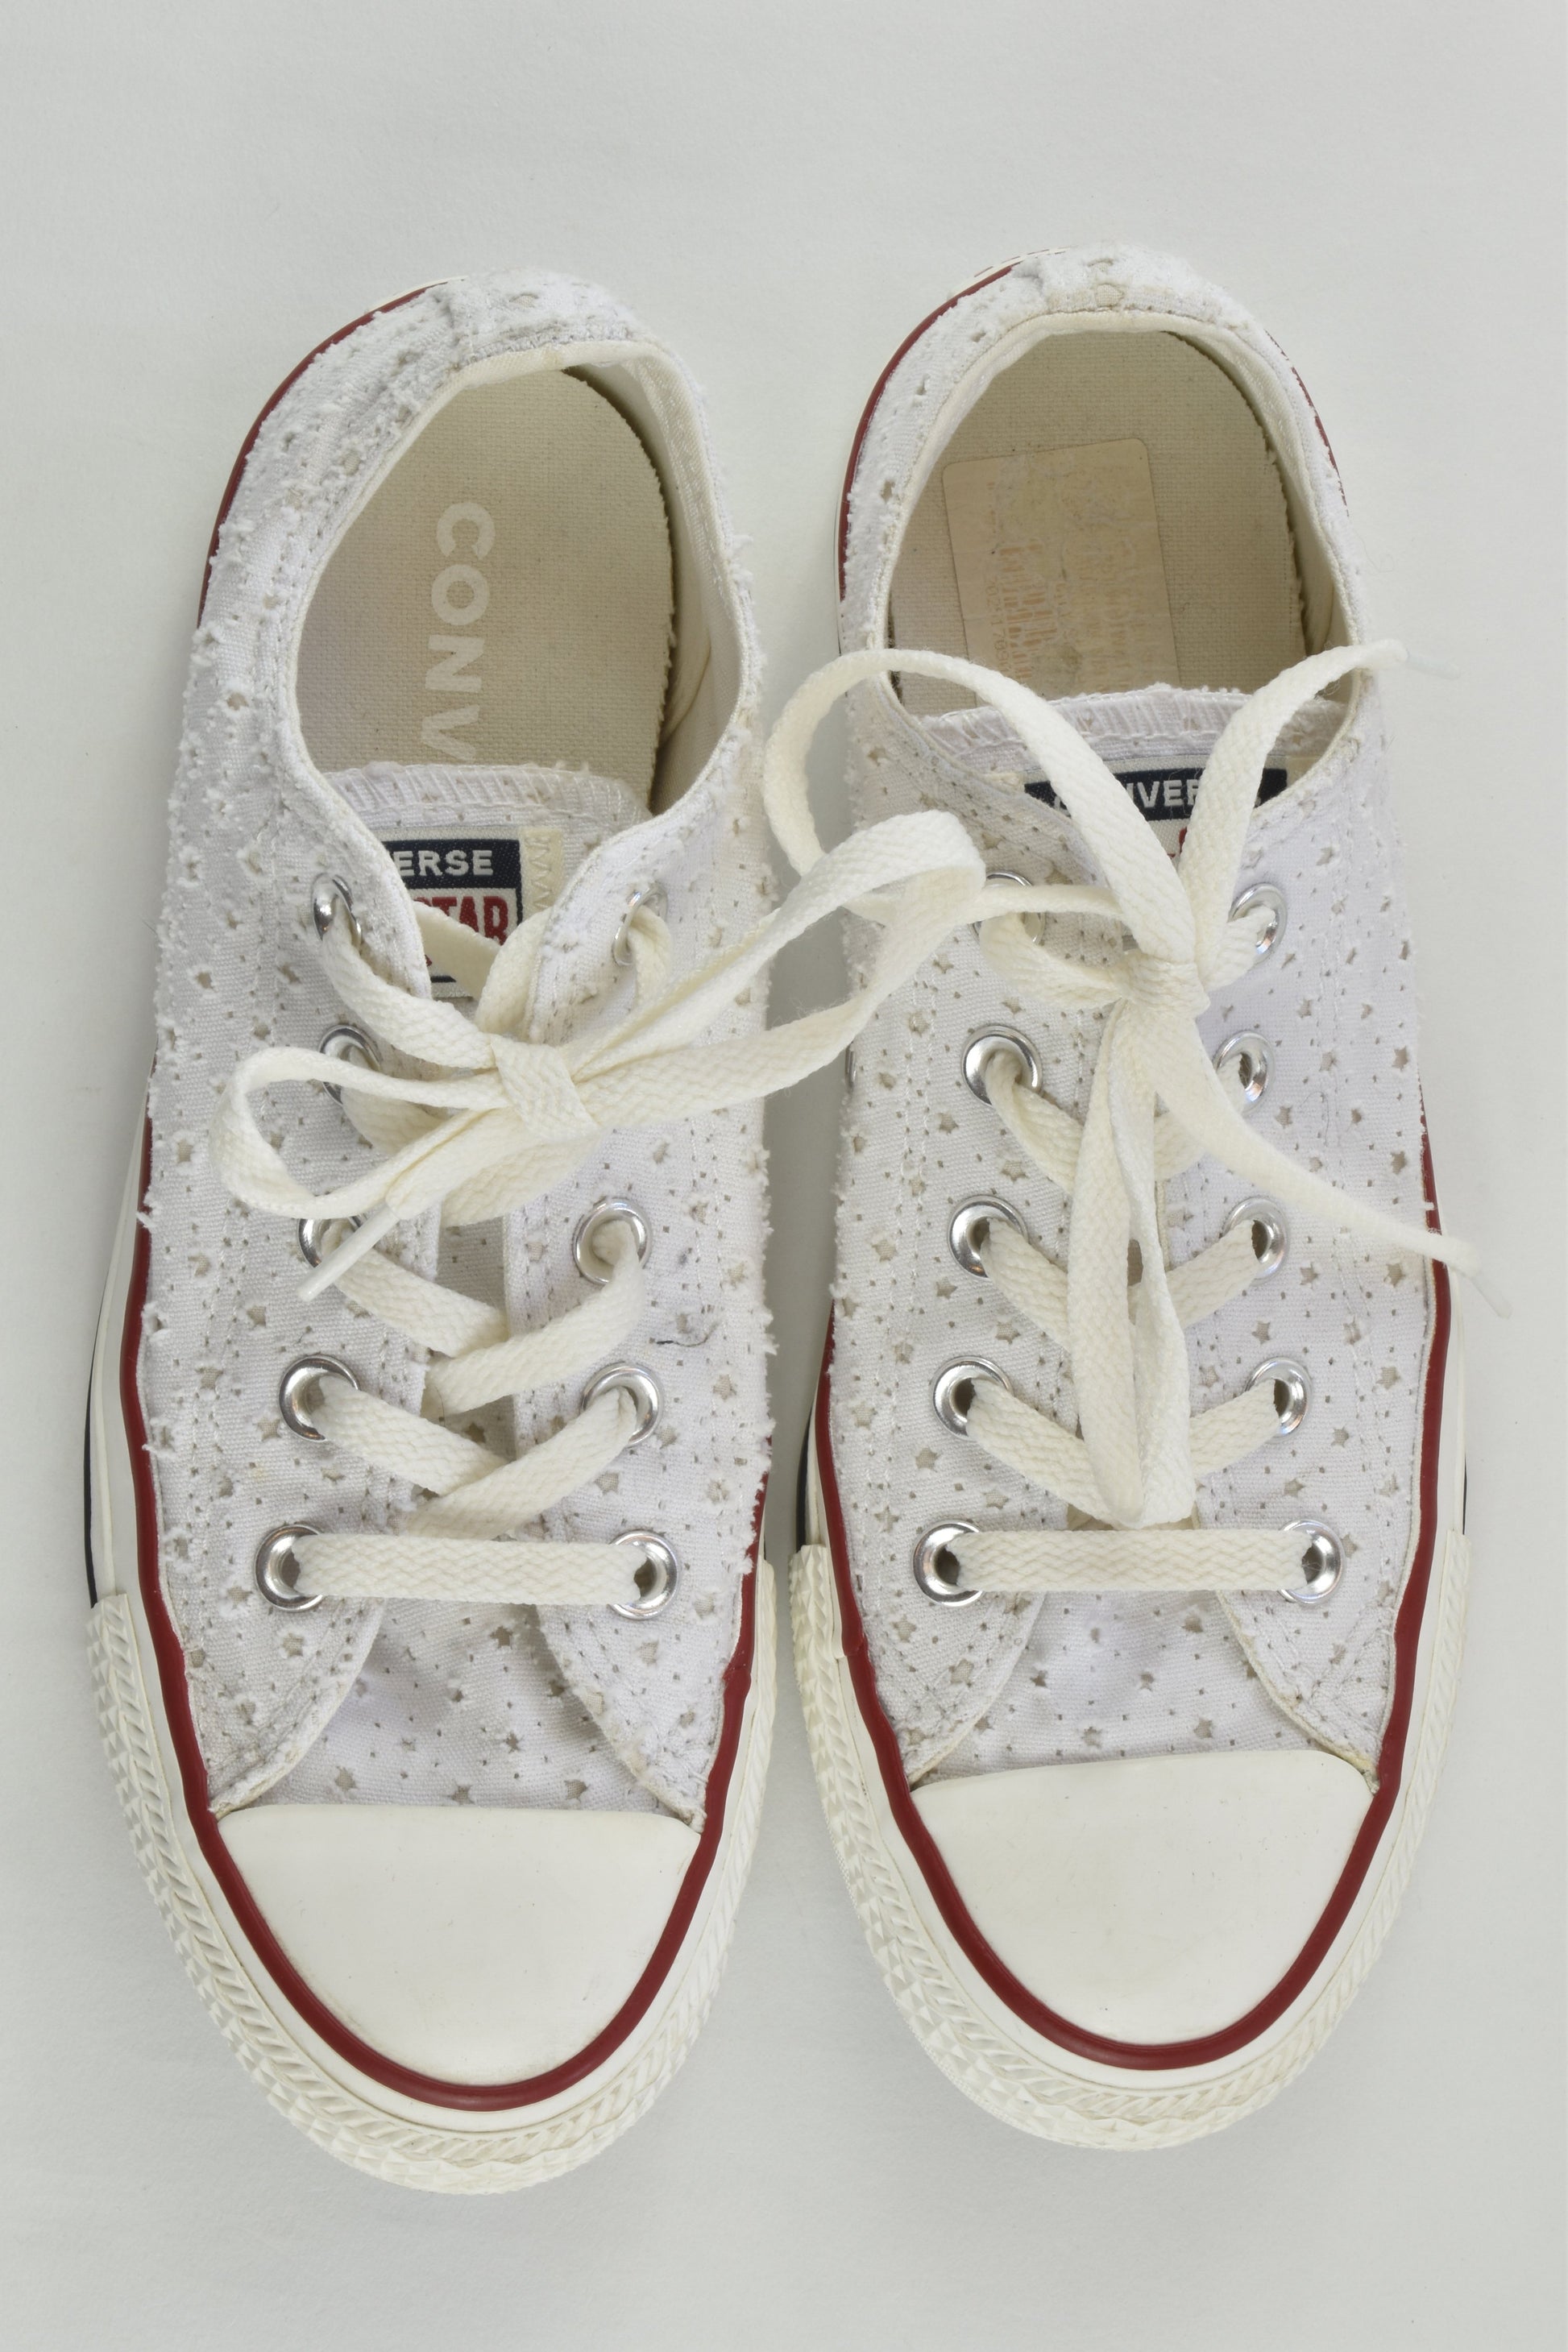 Converse All Star Size UK 4 Shoes